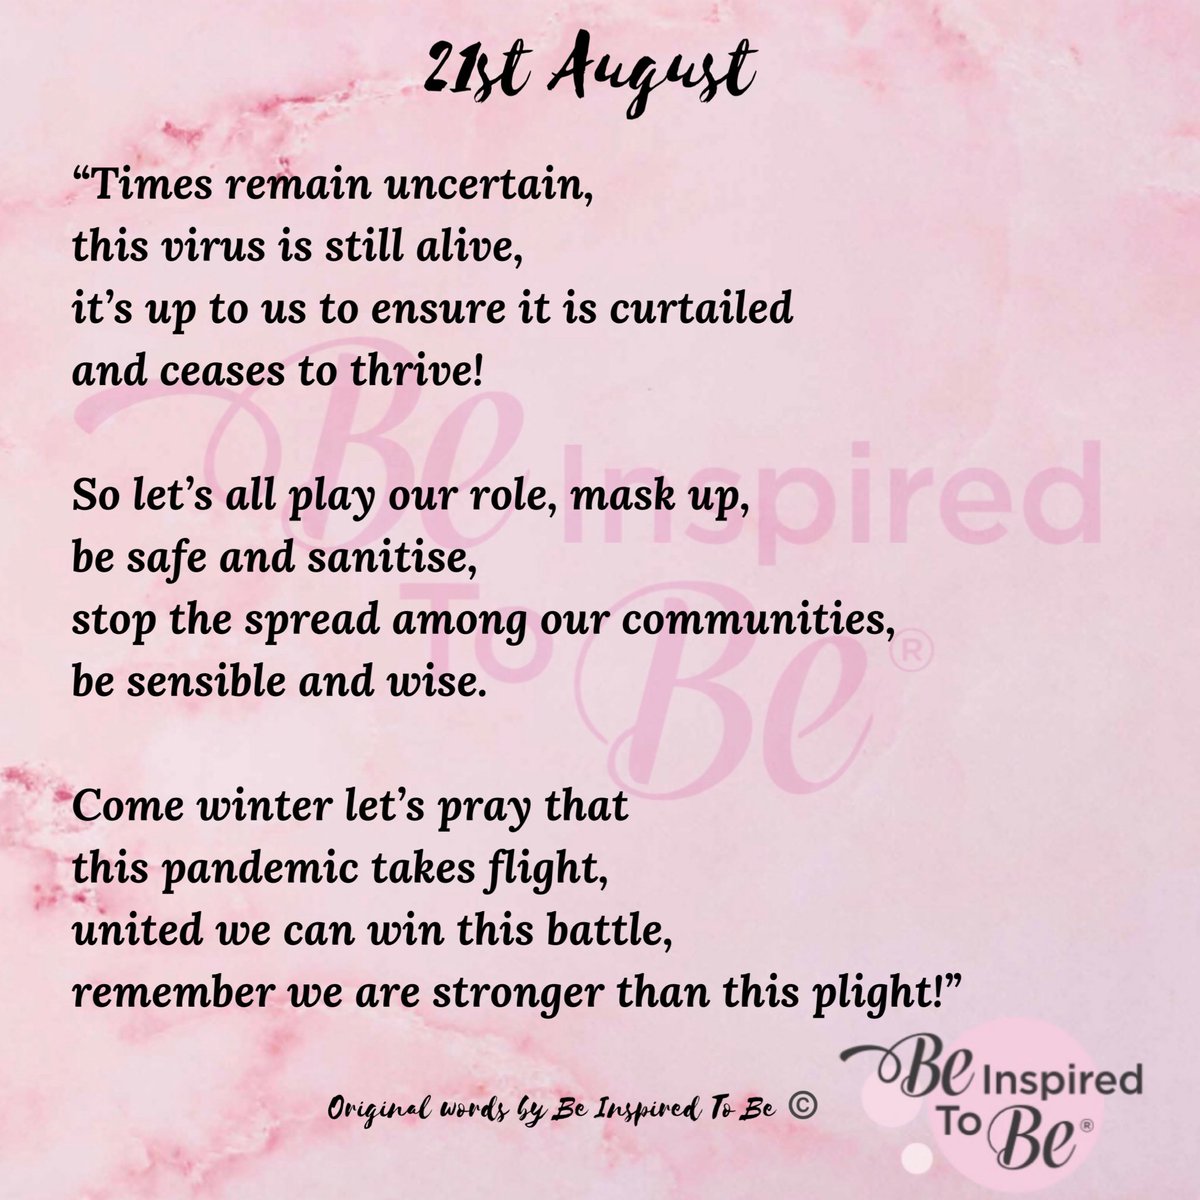 21st August
.
I felt I needed to write about our global pandemic today. We all have our part to play to curtail the spread.
.
United we can win this battle against this virus, but we need to do the right thing, to protect ourselves and others.

#COVID19 #StaySafe #Letsbeatthis